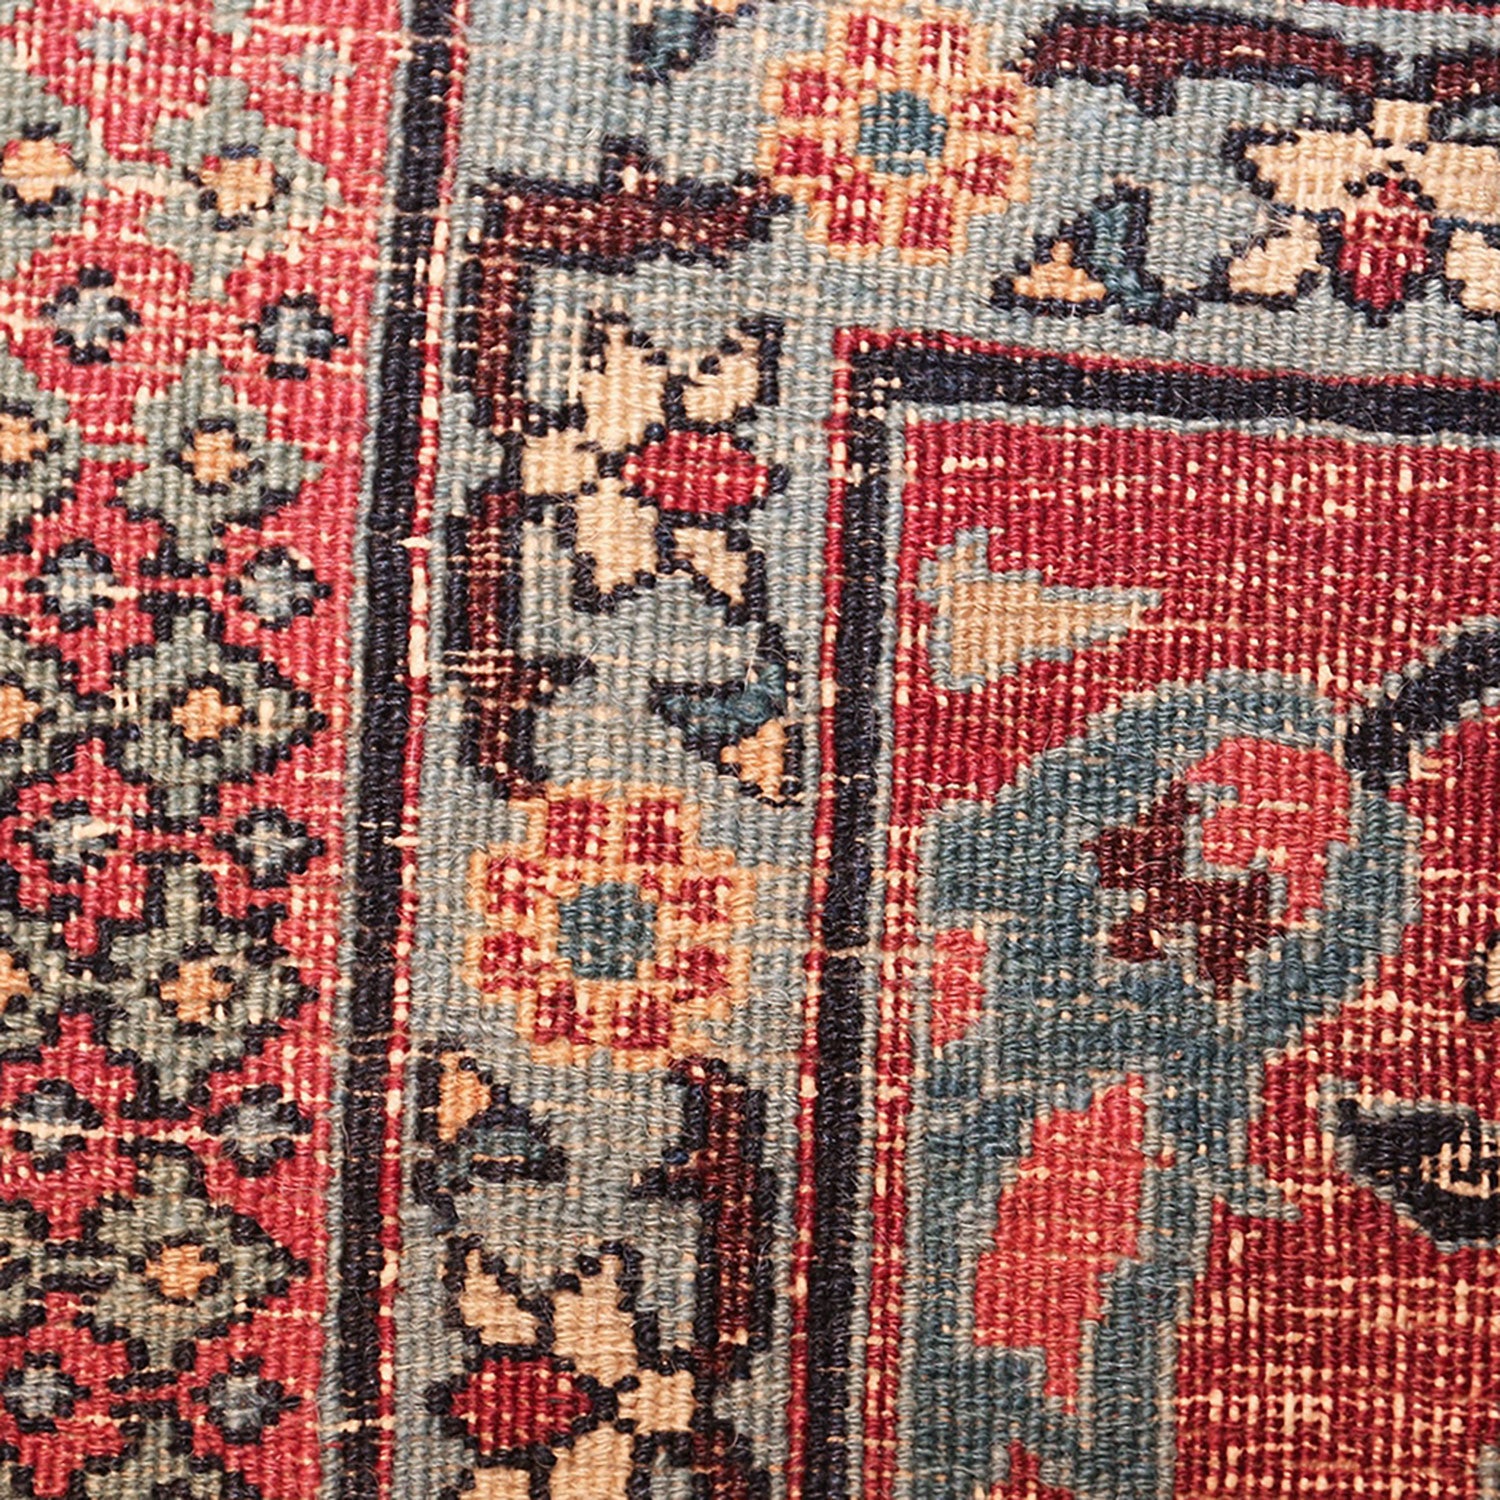 Close-up of a handmade rug with intricate geometric and floral motifs.